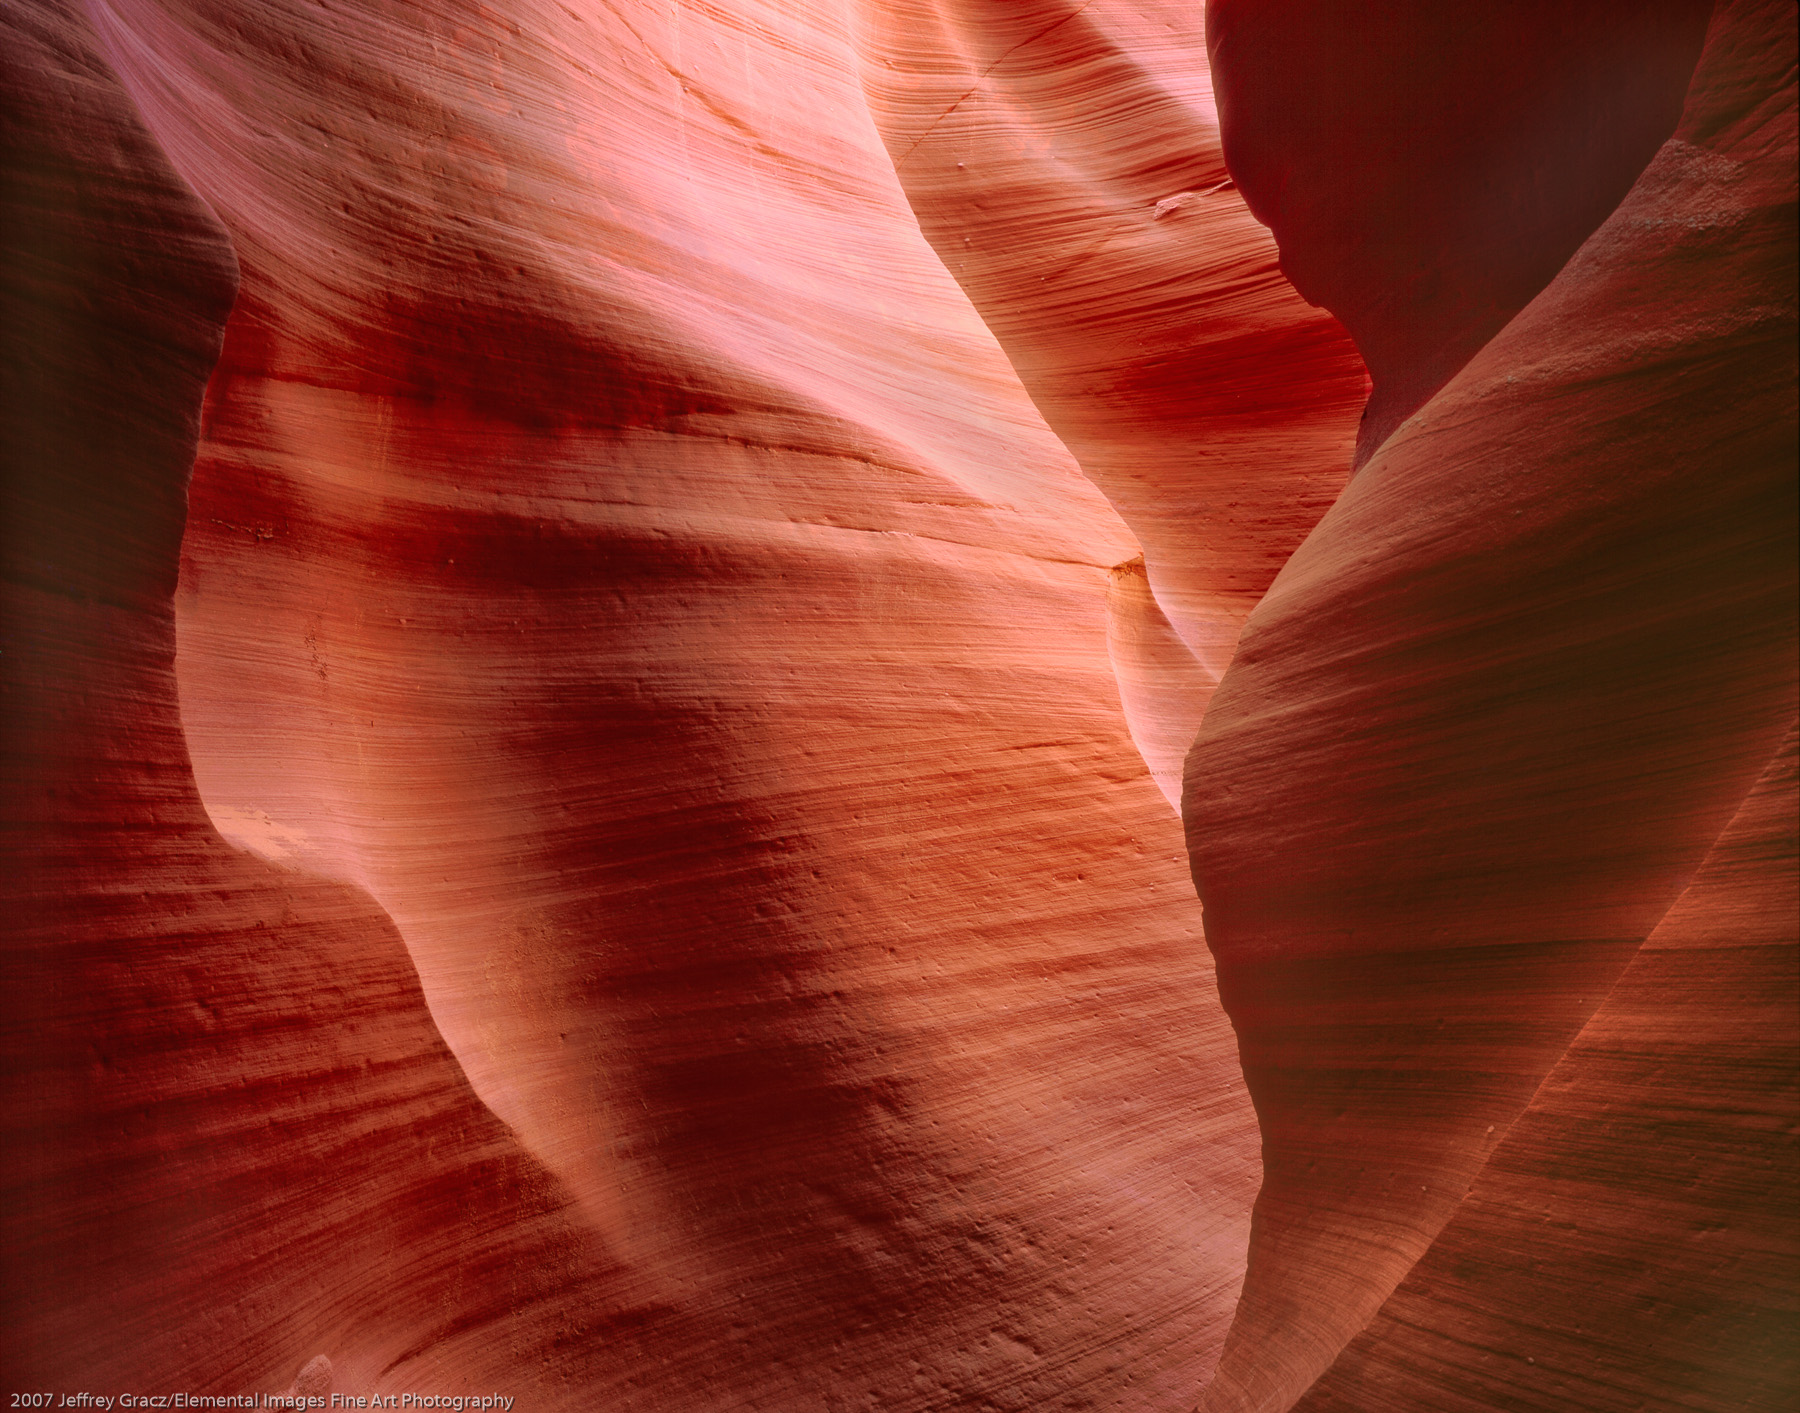 Slot Canyon Abstract #1 | Page | AZ | USA - © 2007 Jeffrey Gracz/Elemental Images Fine Art Photography - All Rights Reserved Worldwide